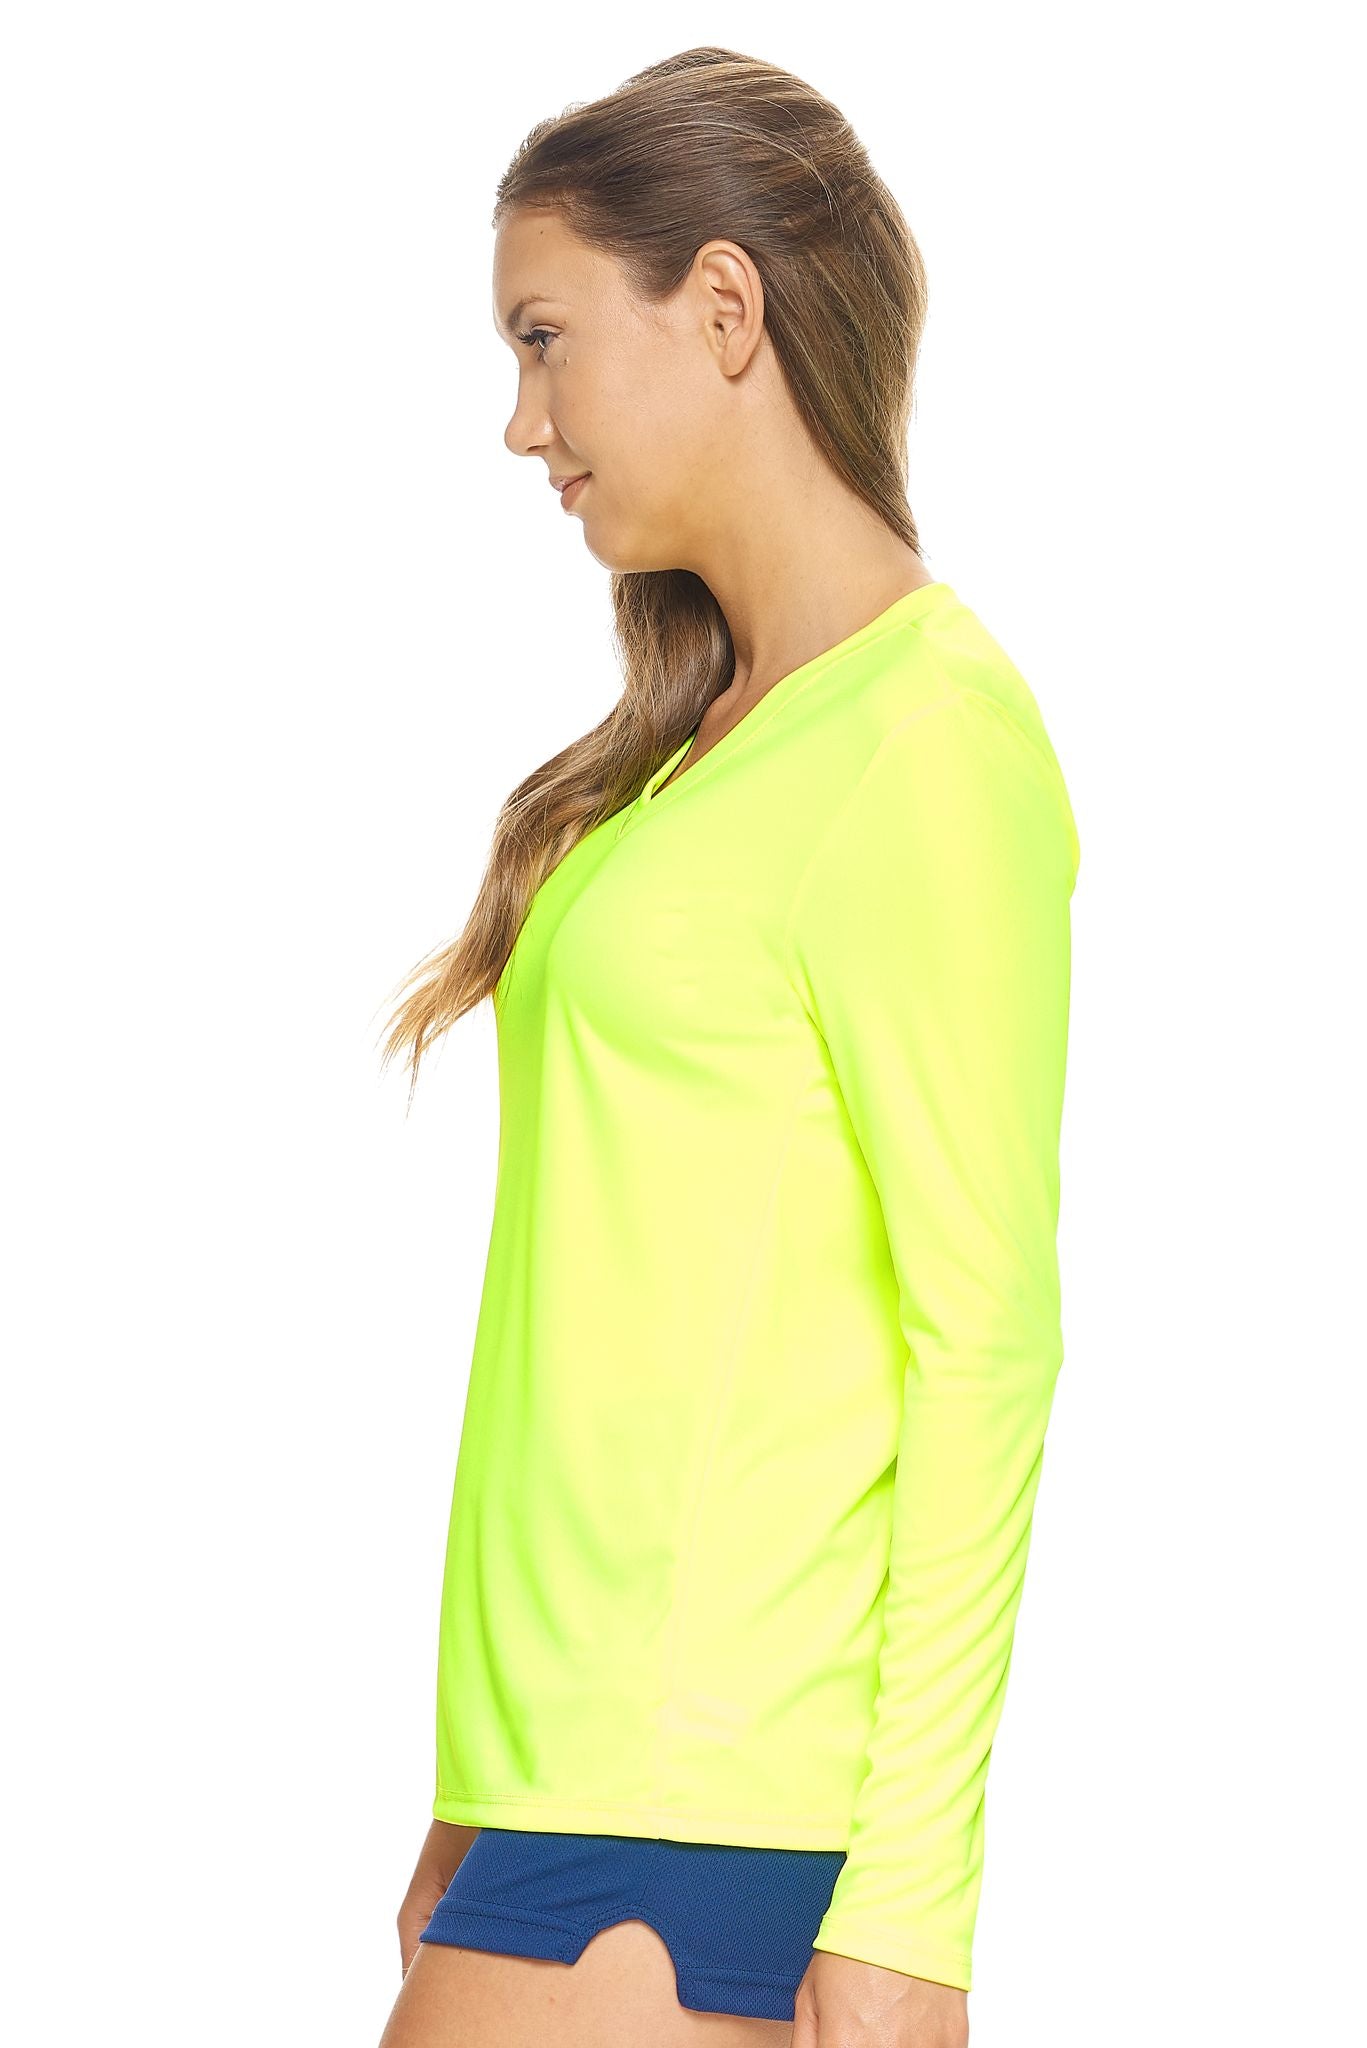 Expert Brand Safety Yellow pk MaX™ V-Neck Long Sleeve Expert Tee Image 2#safety-yellow